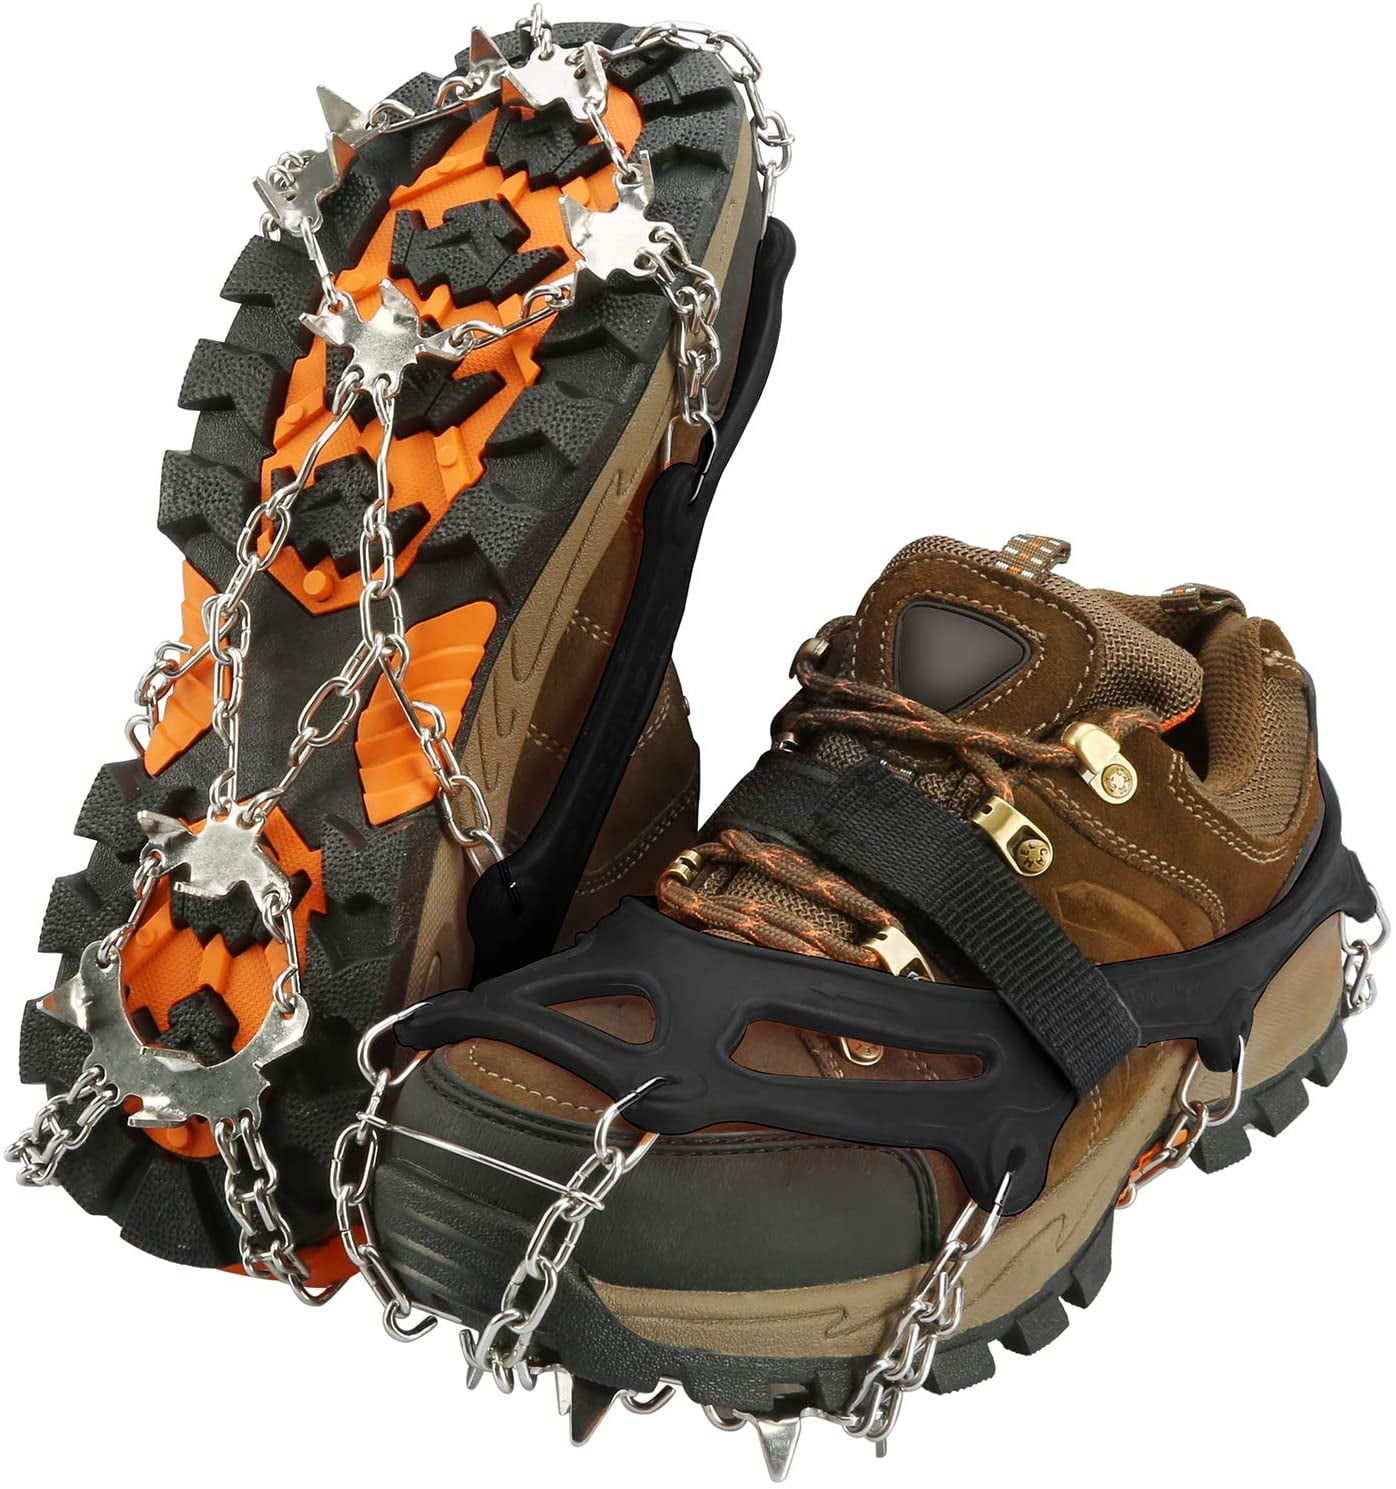 omitium Crampons Traction Cleats,19 Spikes Ice Snow Grips for Shoes Boots,Safe Protect for Hiking,Walking,Jogging,Ice Fishing,with Storage Bag and 1Pair Strap 